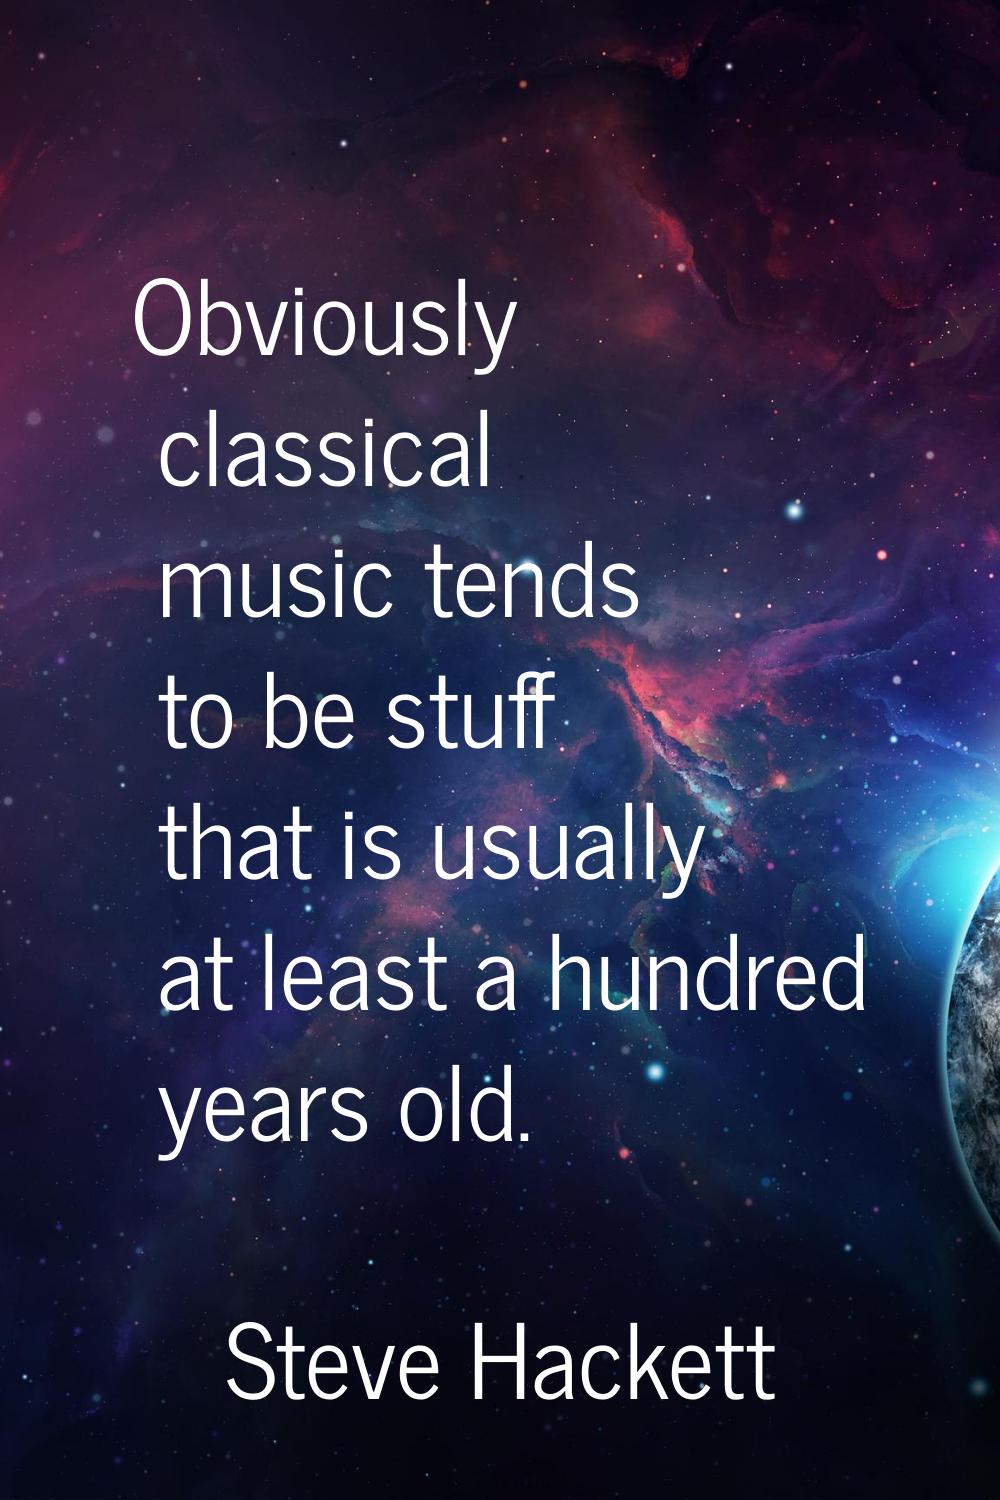 Obviously classical music tends to be stuff that is usually at least a hundred years old.